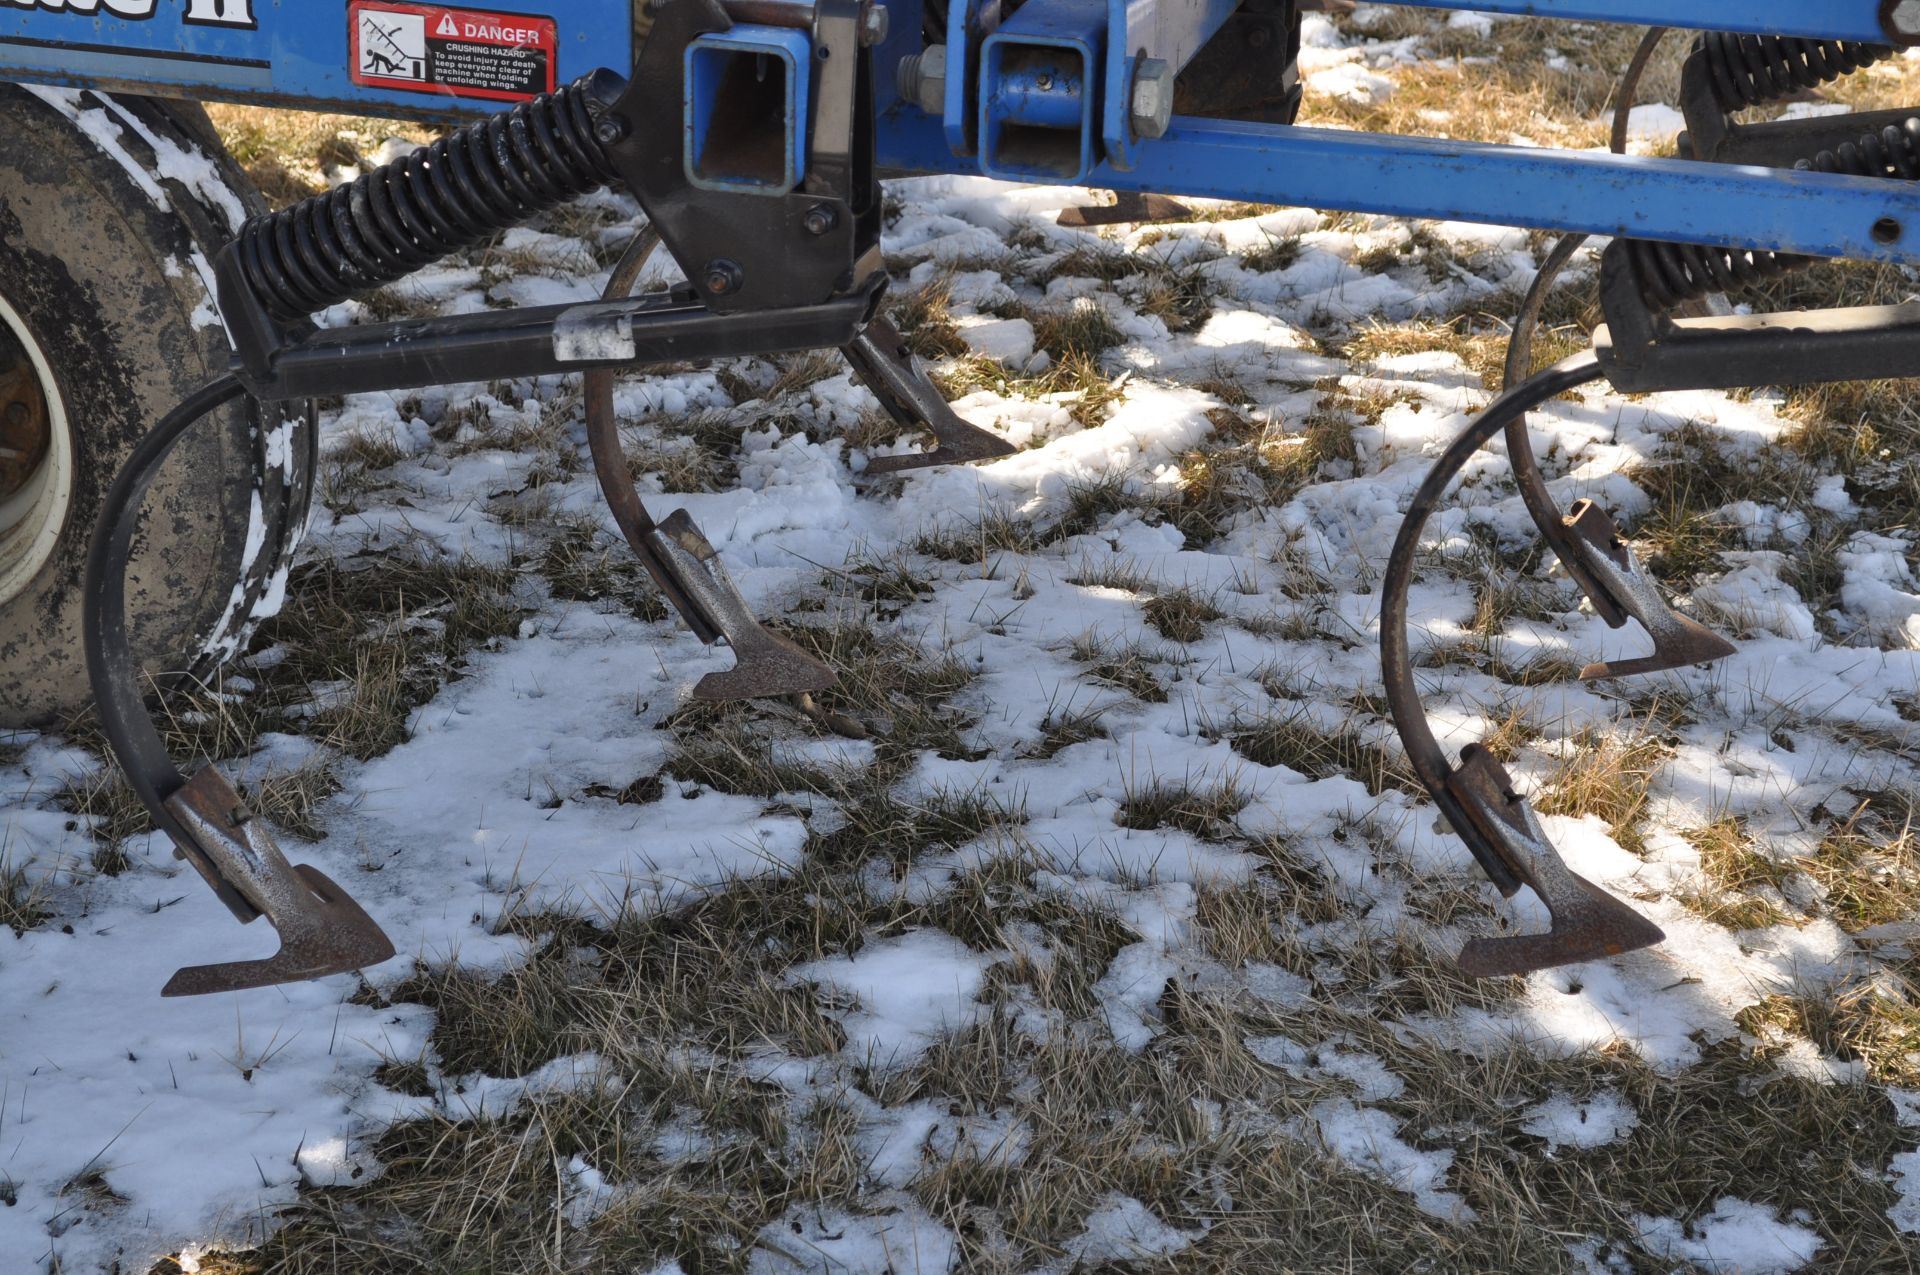 41’ DMI Tiger Mate II field cultivator, dble hyd fold, walking tandems, rear hitch, 4 bar spring - Image 20 of 21